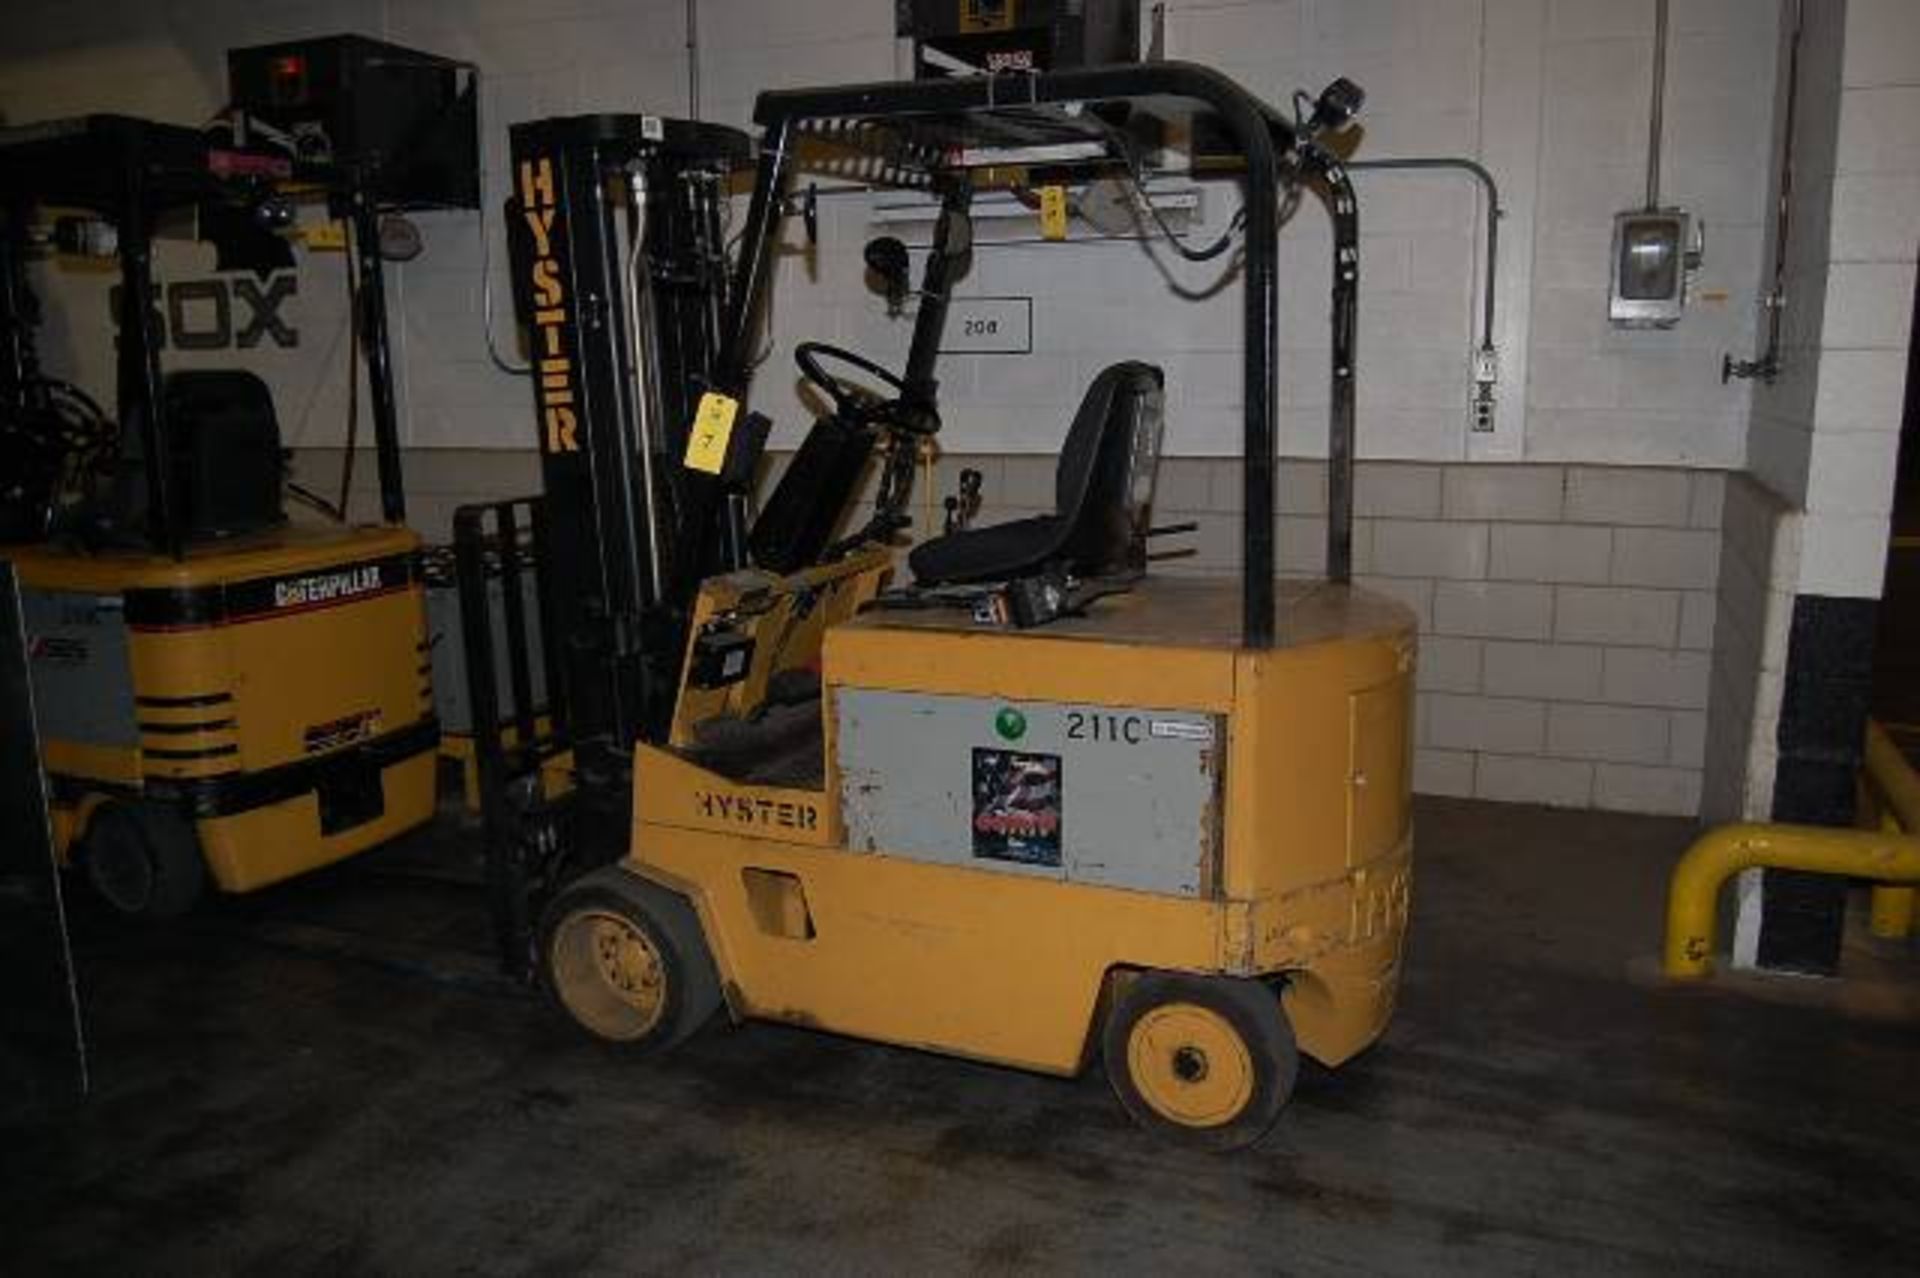 Hester Model #E50Xl-33 Electric Forklift, Rated 5250 lbs. Lift Capacity, 196 in. Lift Height, Side